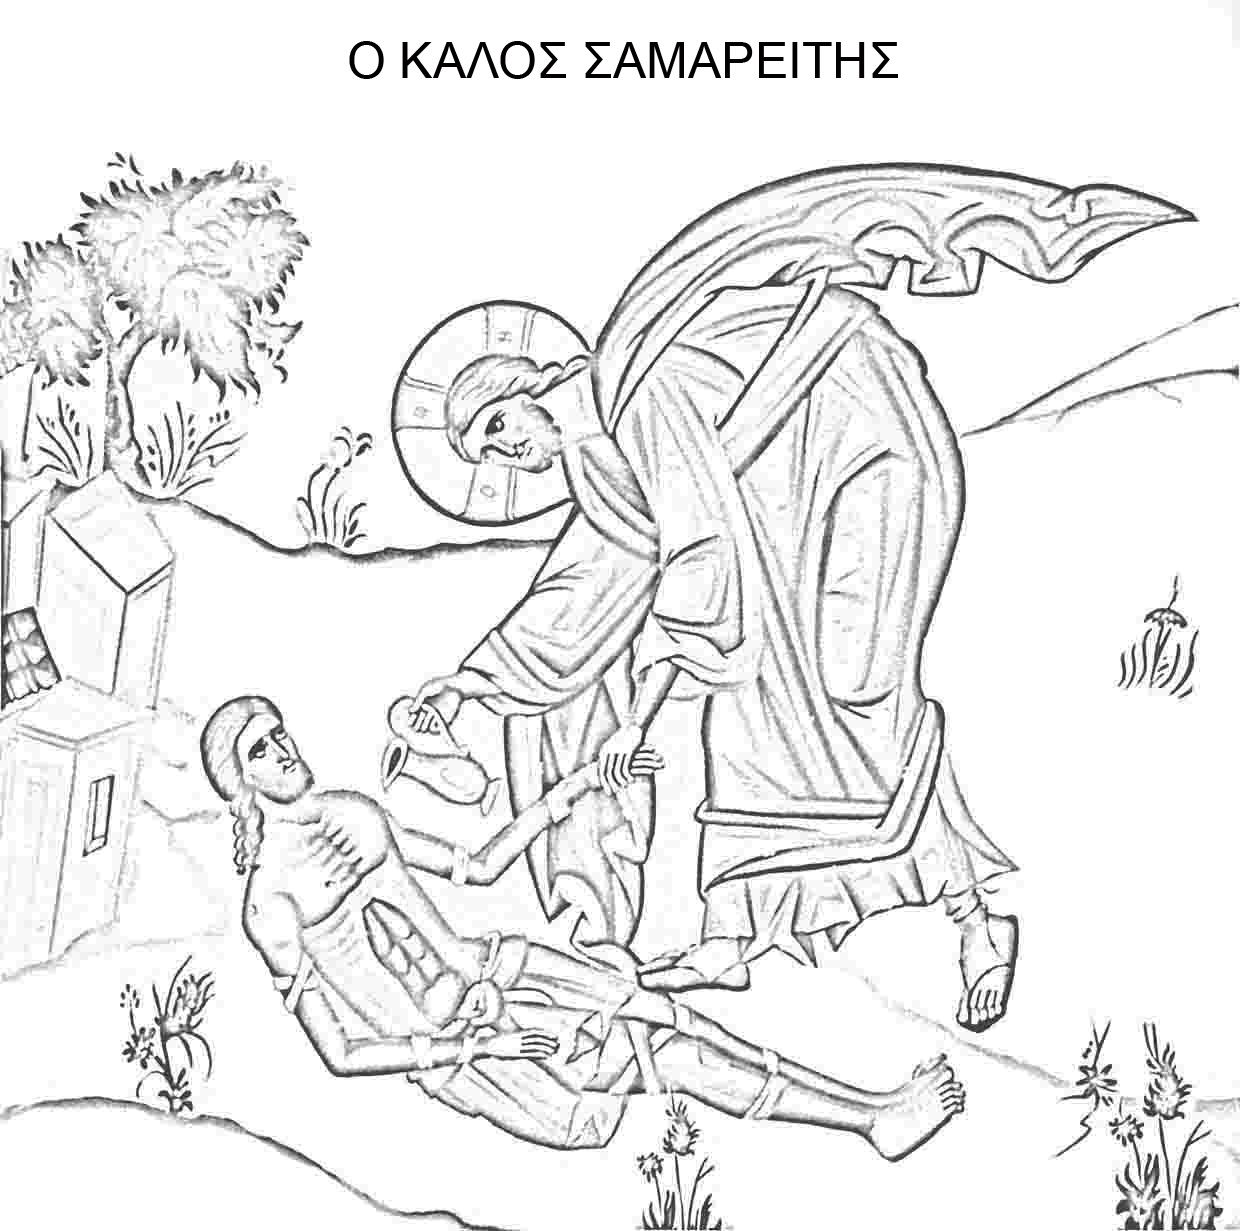 Orthodox Christian Education: Orthodox Coloring Pages